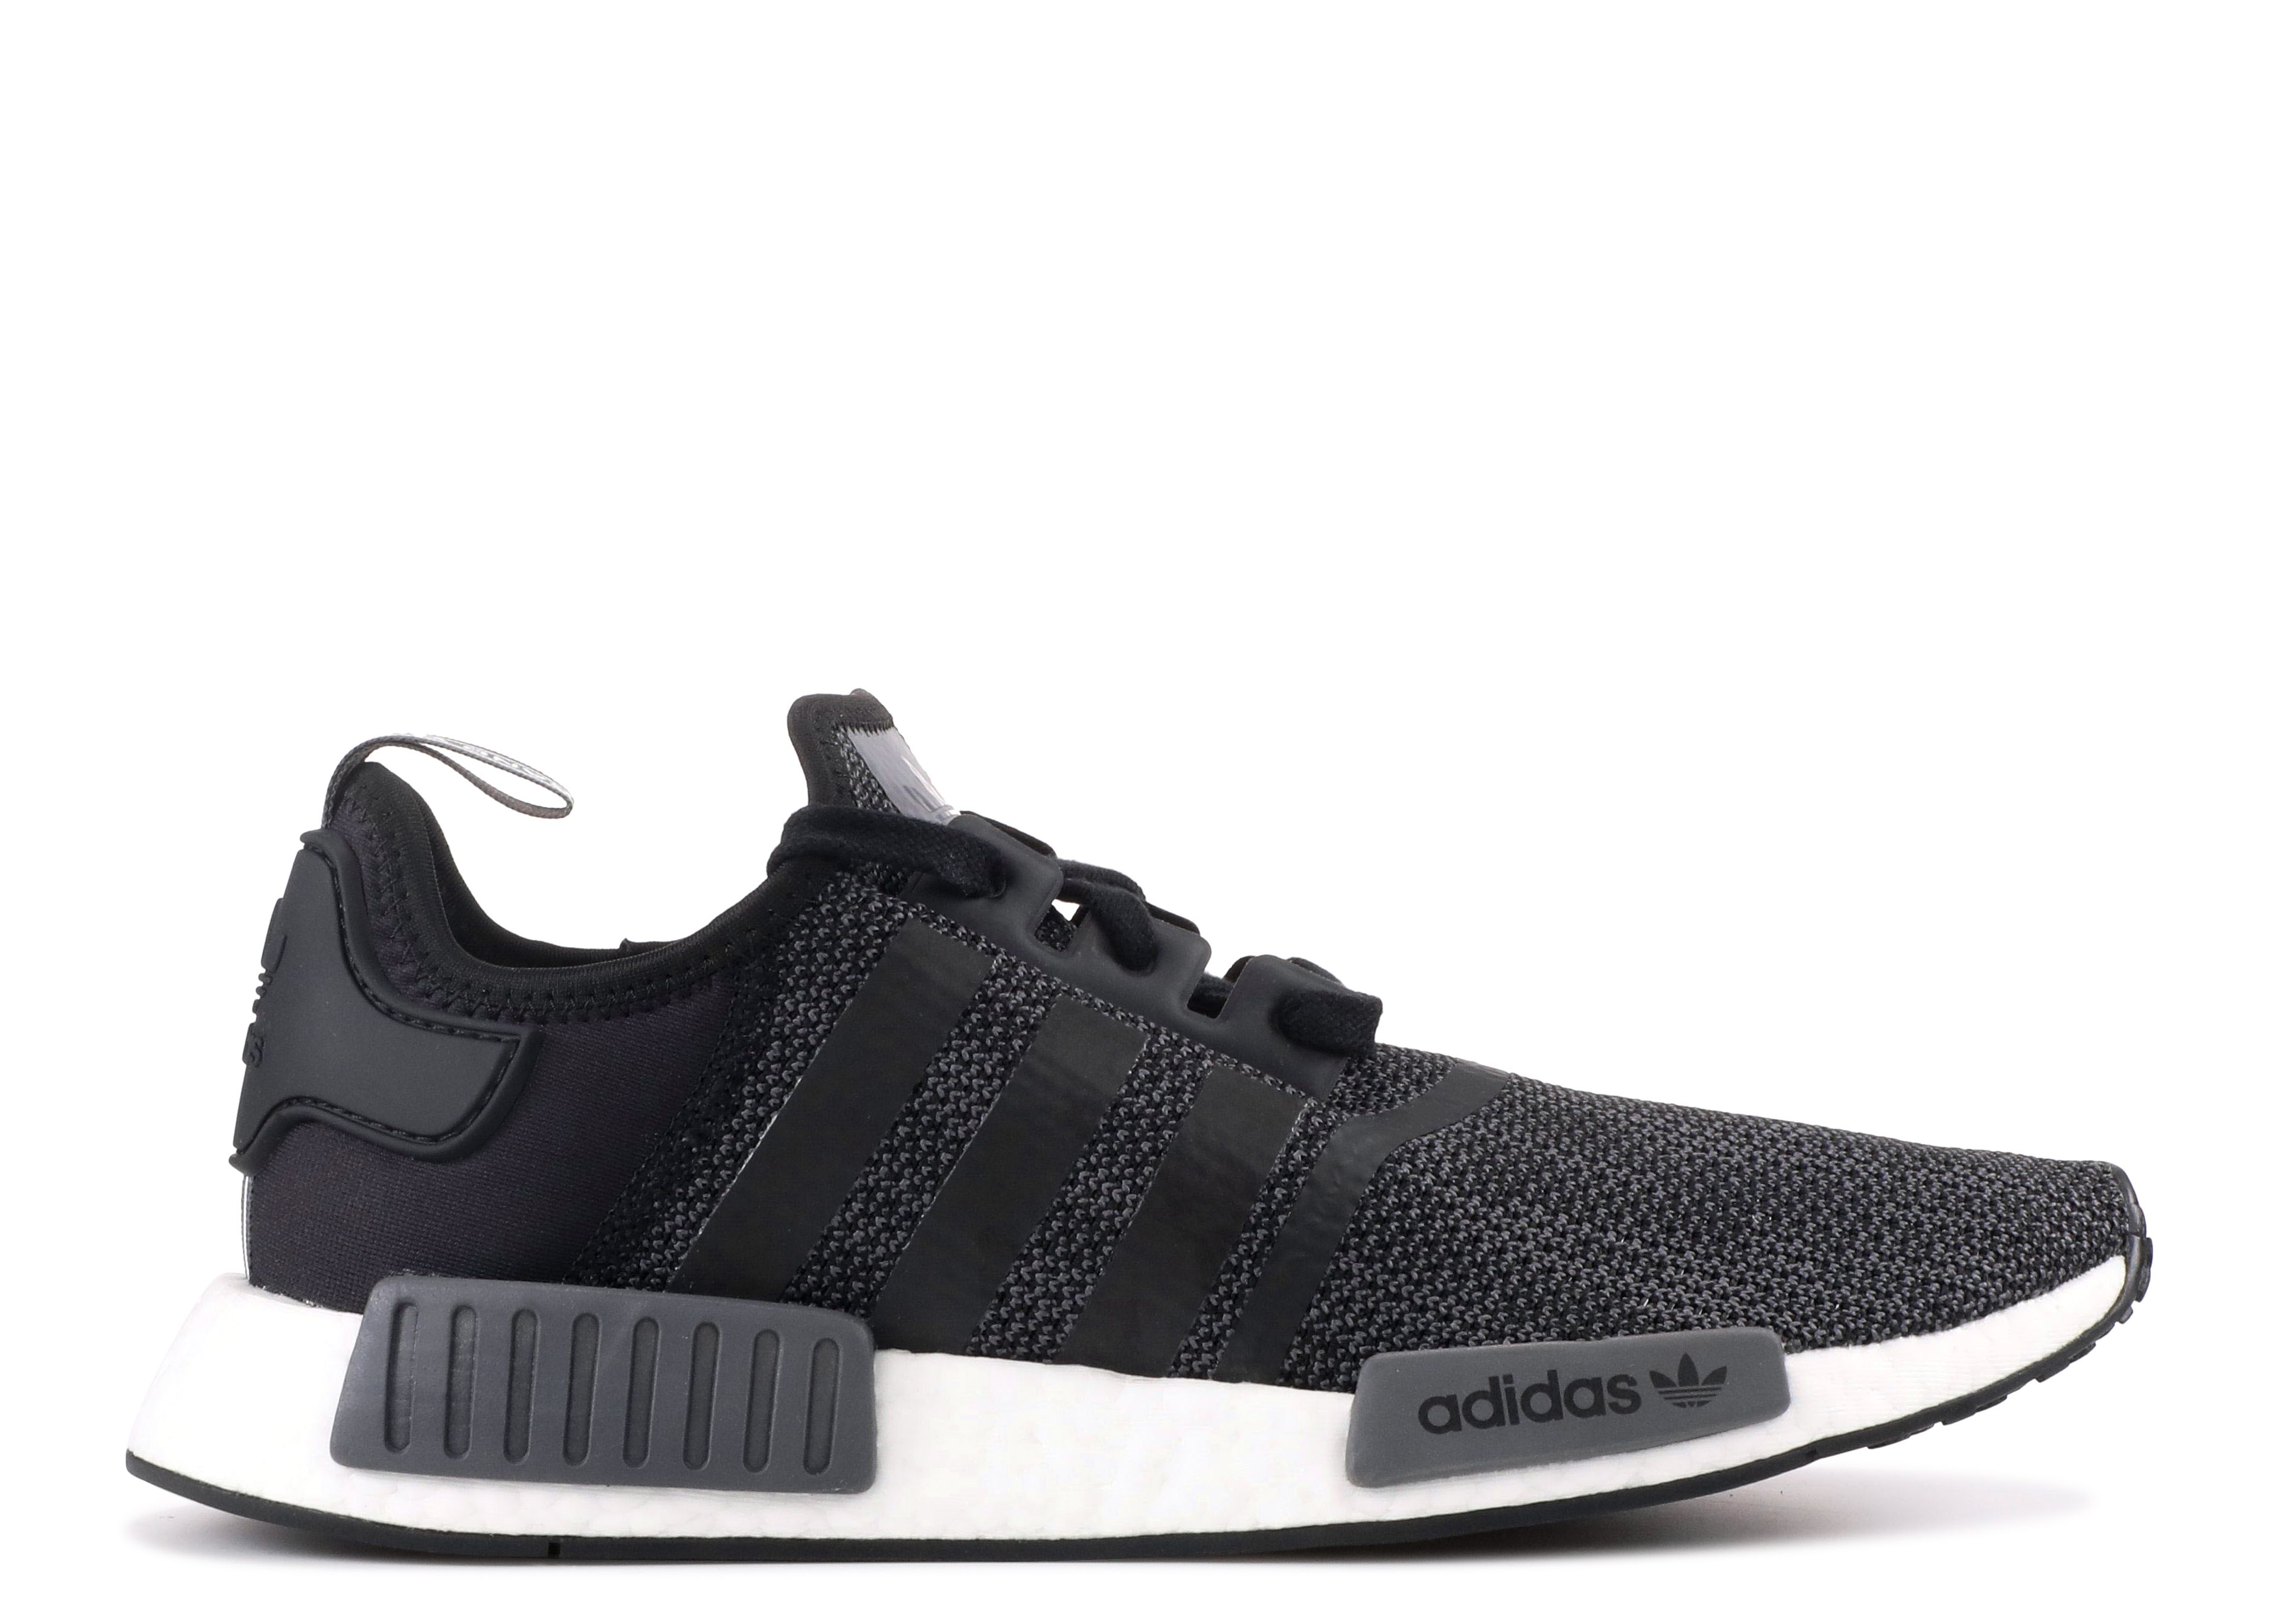 nmd_r1 carbon